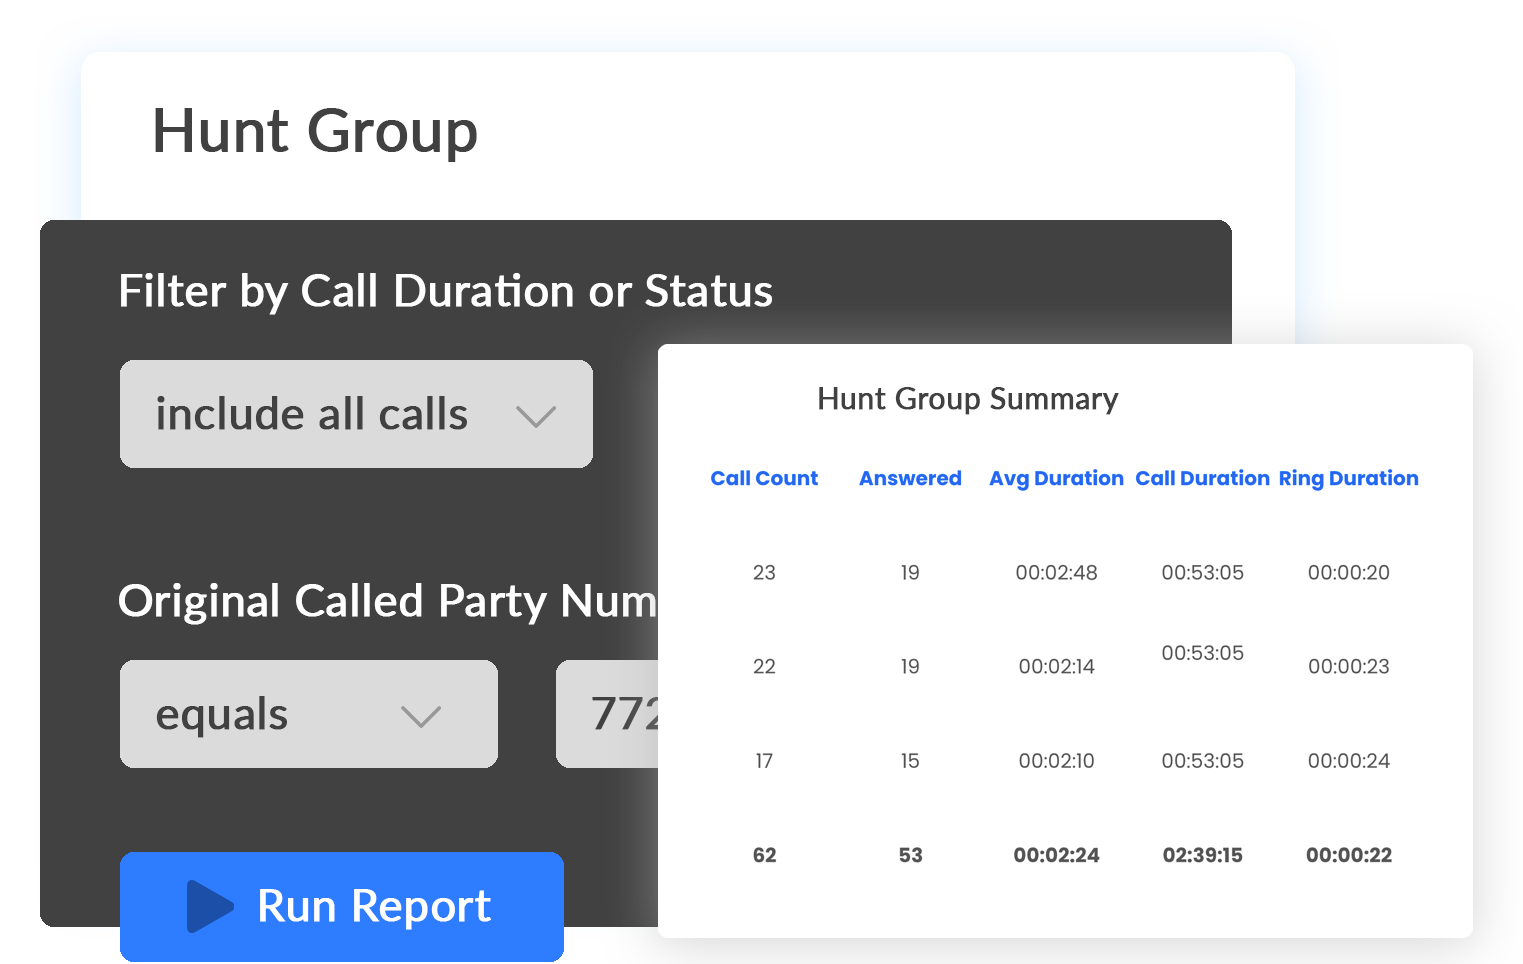 Track hunt group and call queue performance.